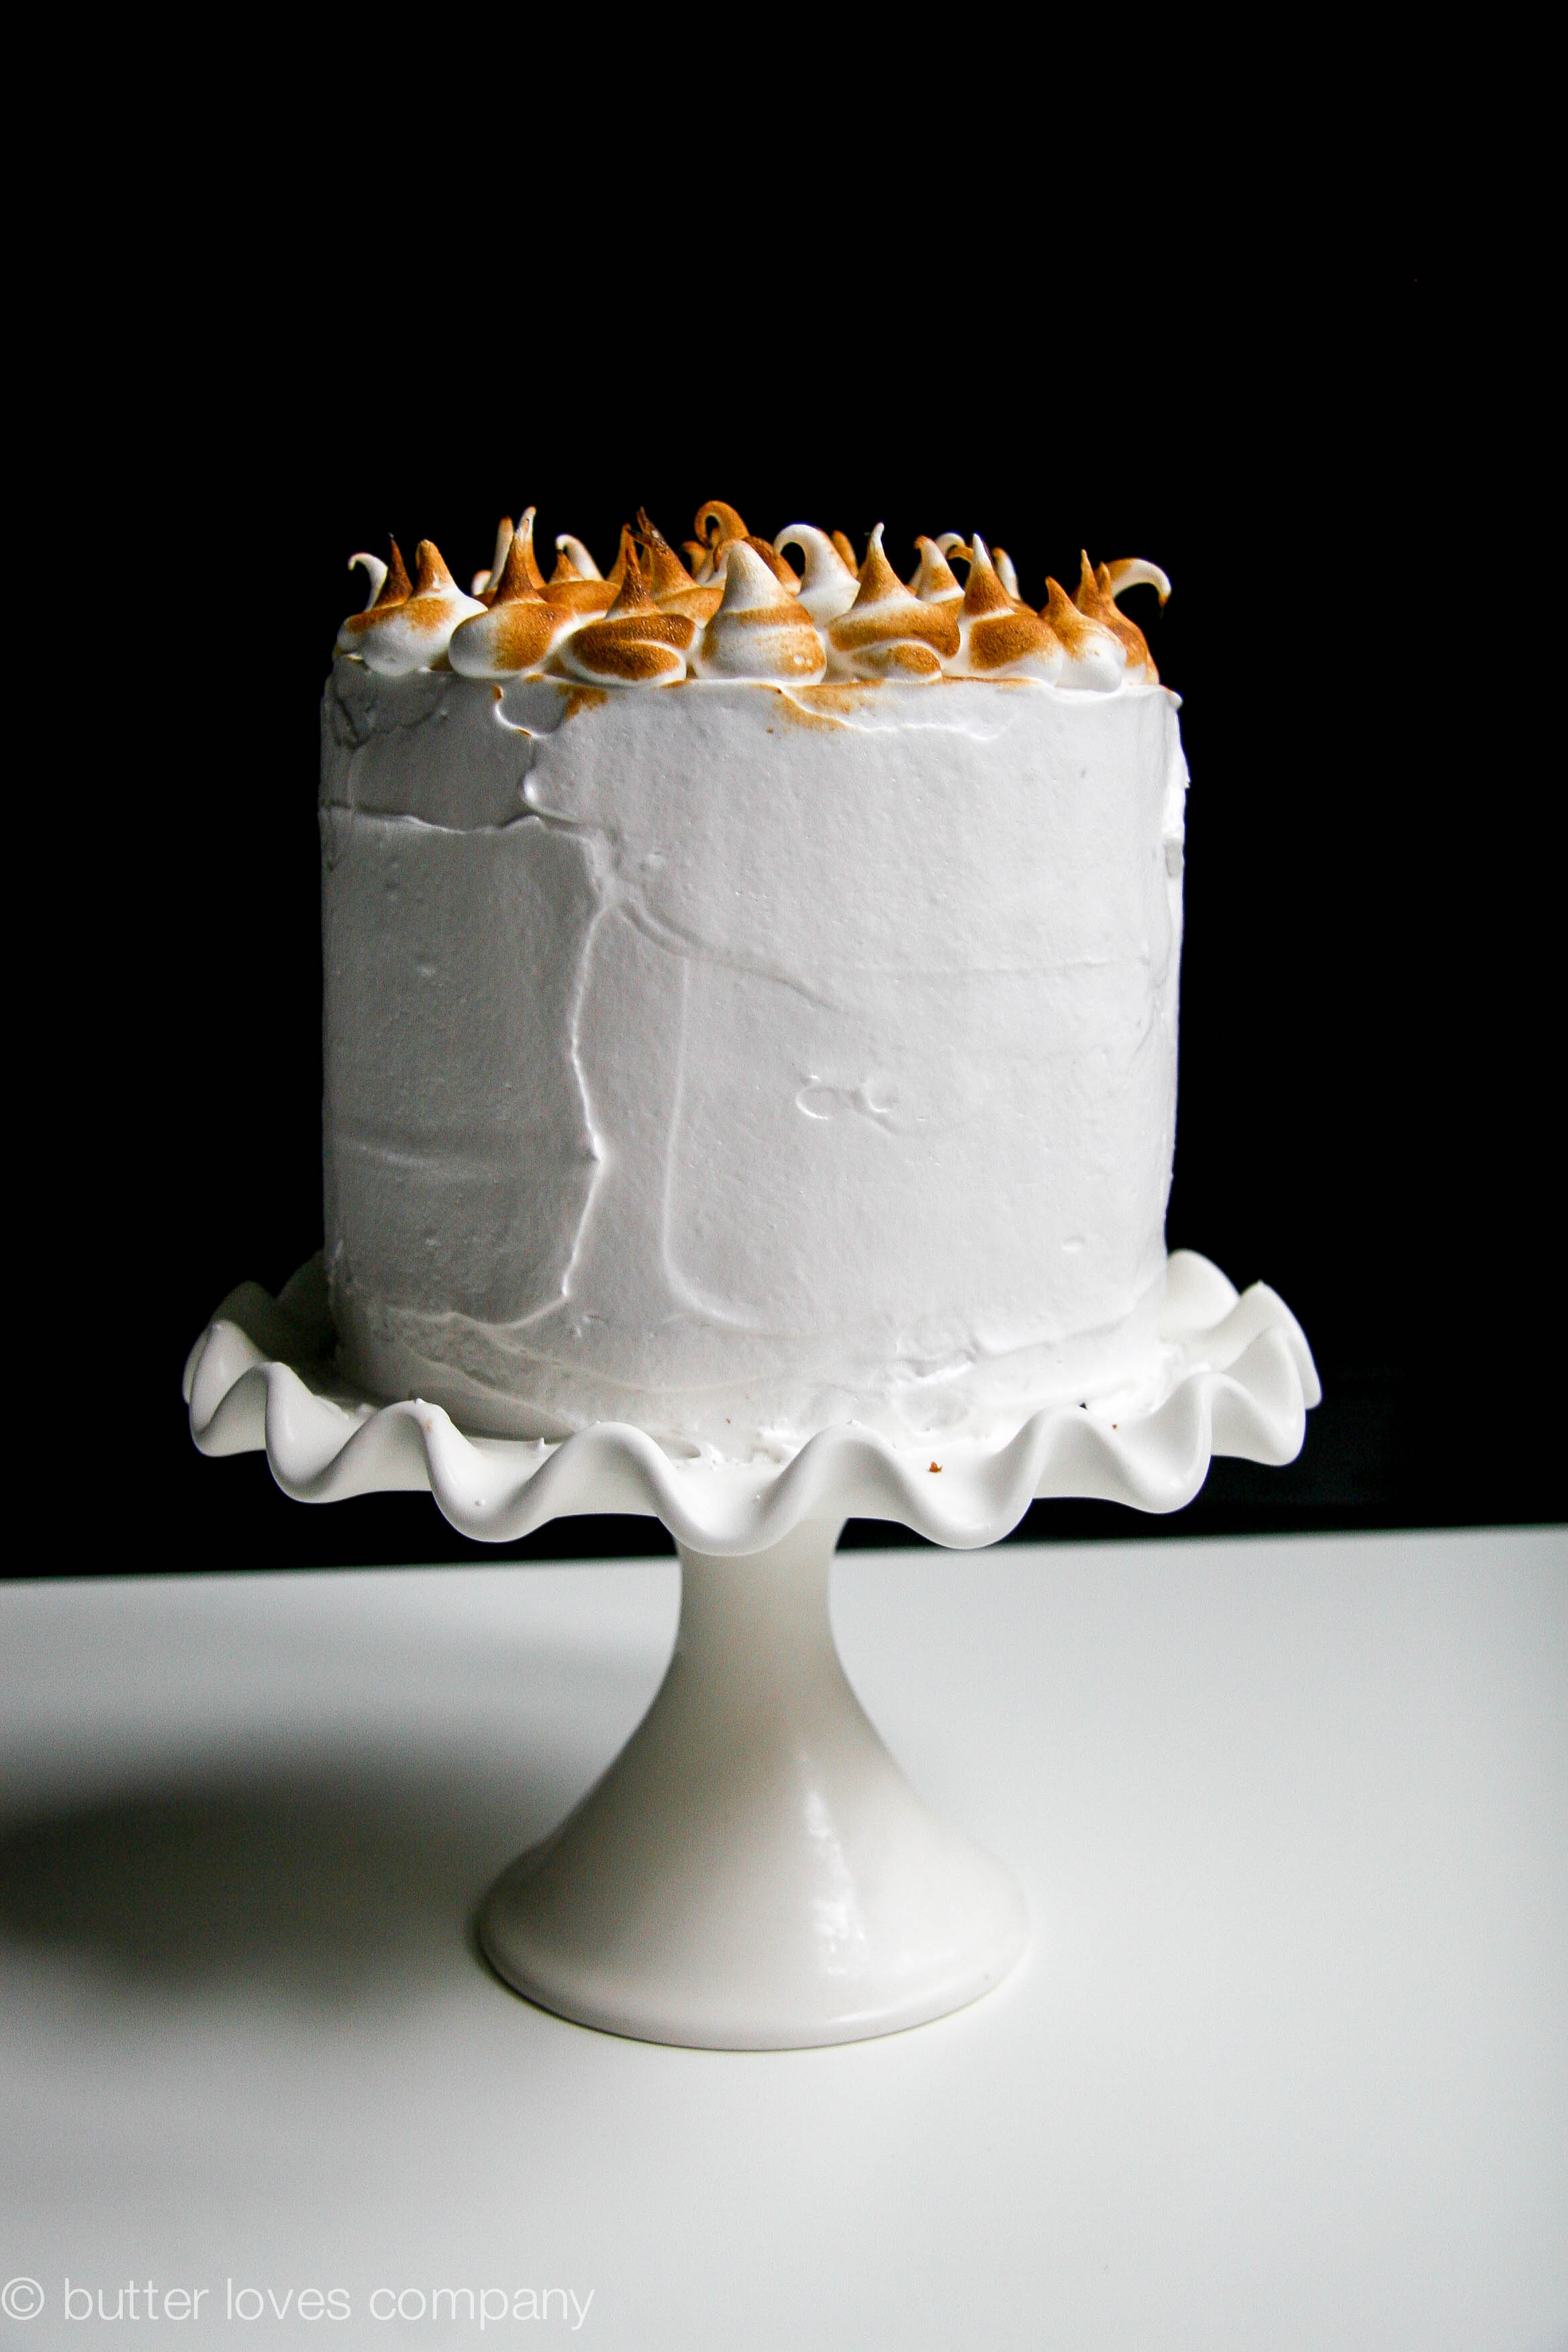 6-inch super s'mores cake | butter loves company